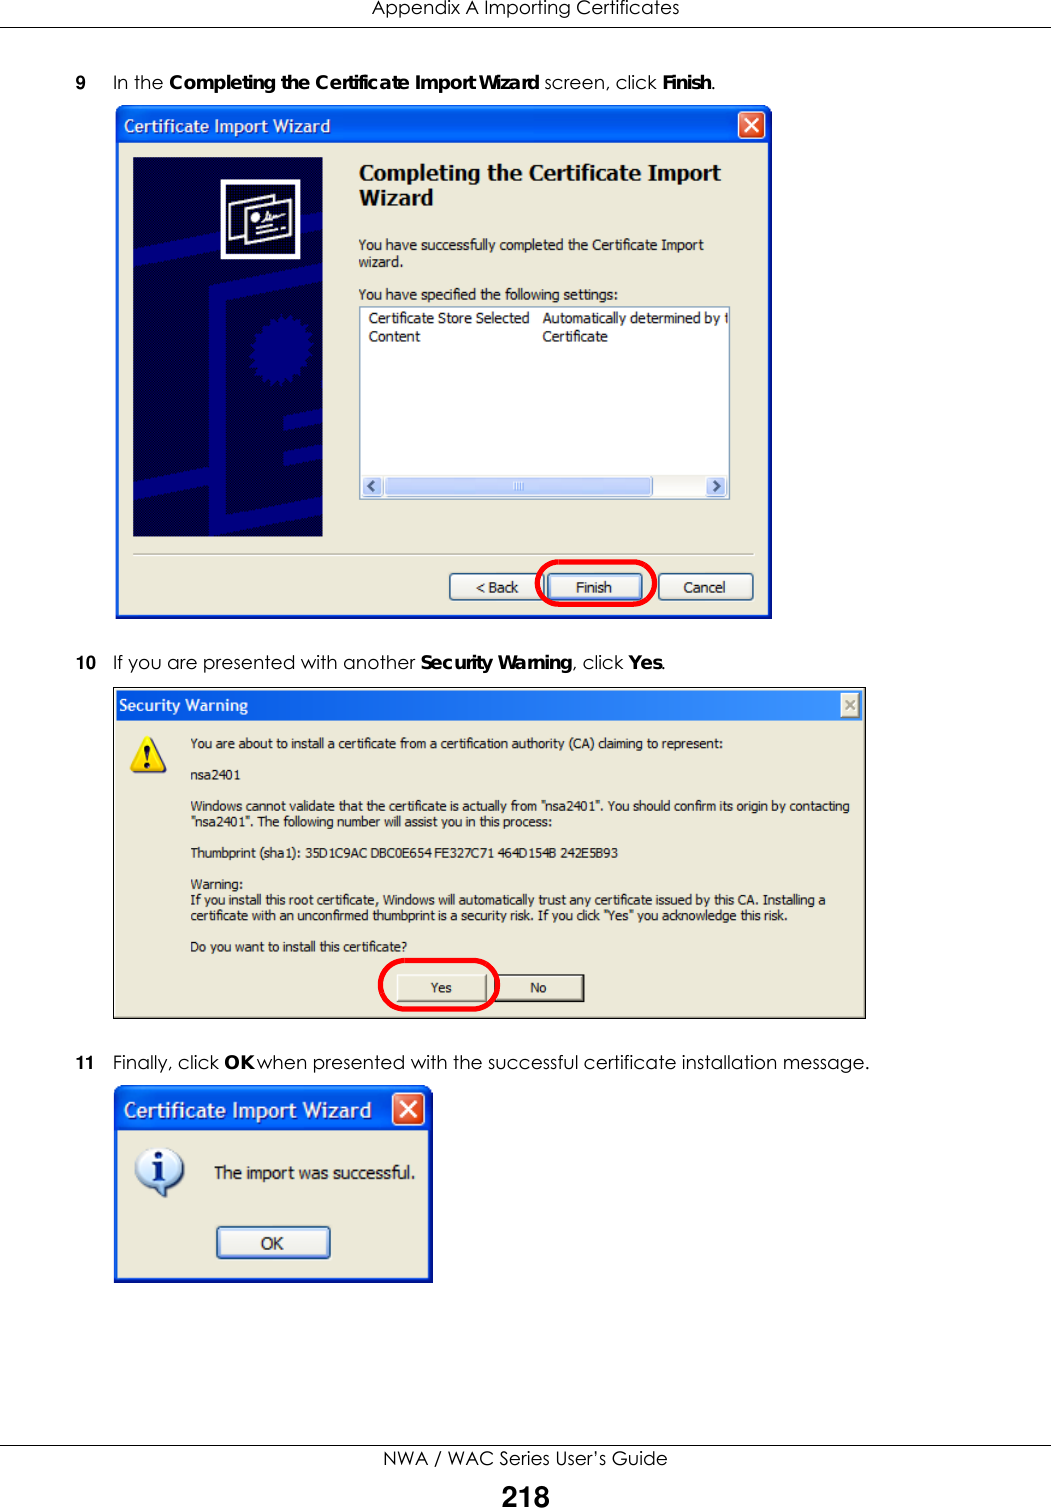 Appendix A Importing CertificatesNWA / WAC Series User’s Guide2189In the Completing the Certificate Import Wizard screen, click Finish.10 If you are presented with another Security Warning, click Yes.11 Finally, click OK when presented with the successful certificate installation message.